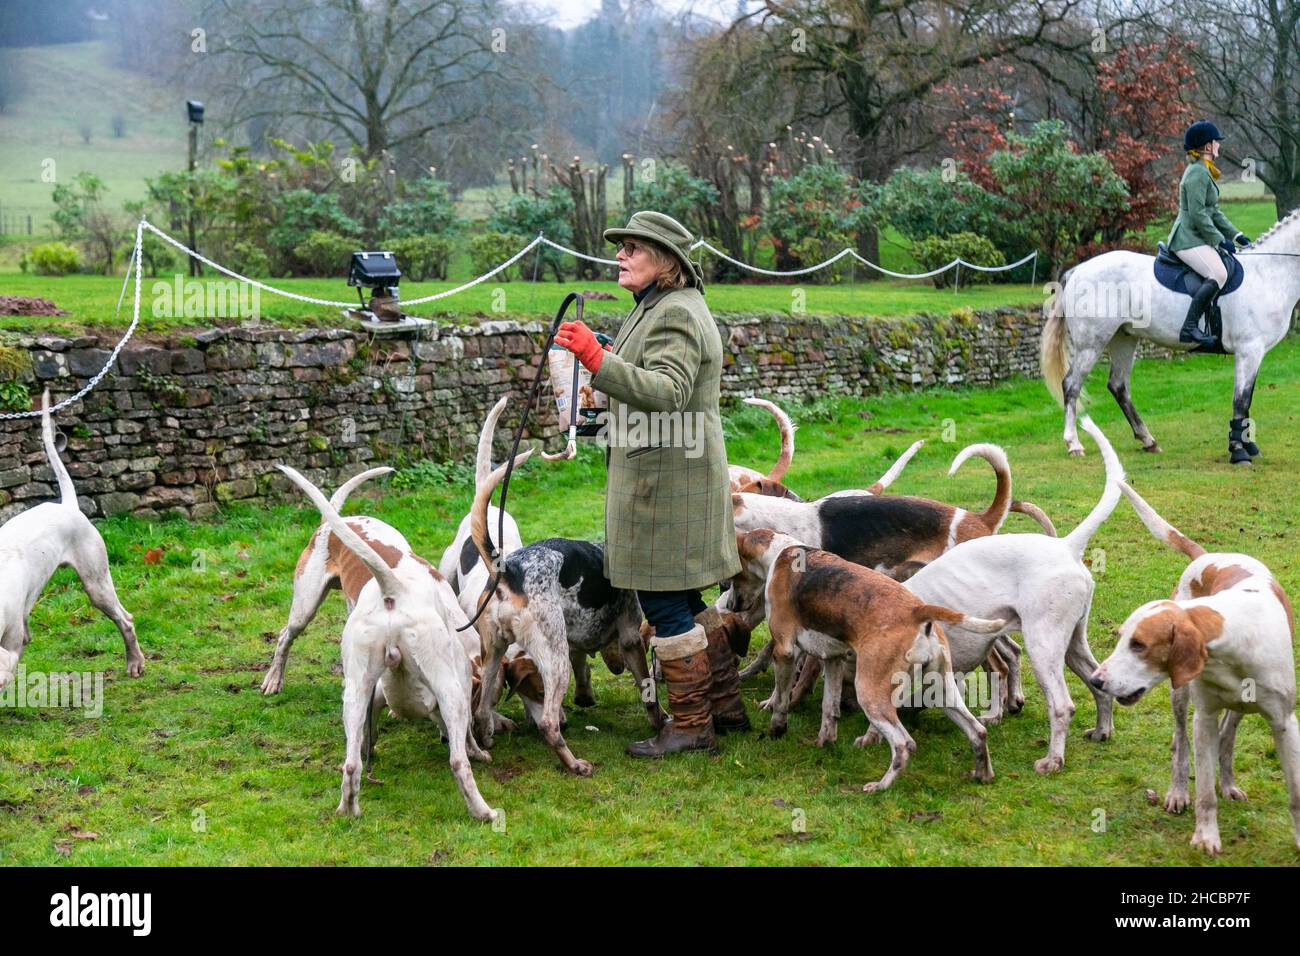 Hagley, Worcestershire, UK. 27th Dec, 2021. Hazel Sheppard tends to the hounds at first meet of the Albrighton and Woodland Hunt at Hagley Hall since the Coronavirus pandemic. The Albrighton and Woodland Hunt meet annually at Hagley Hall in Worcestershire. Credit: Peter Lopeman/Alamy Live News Stock Photo